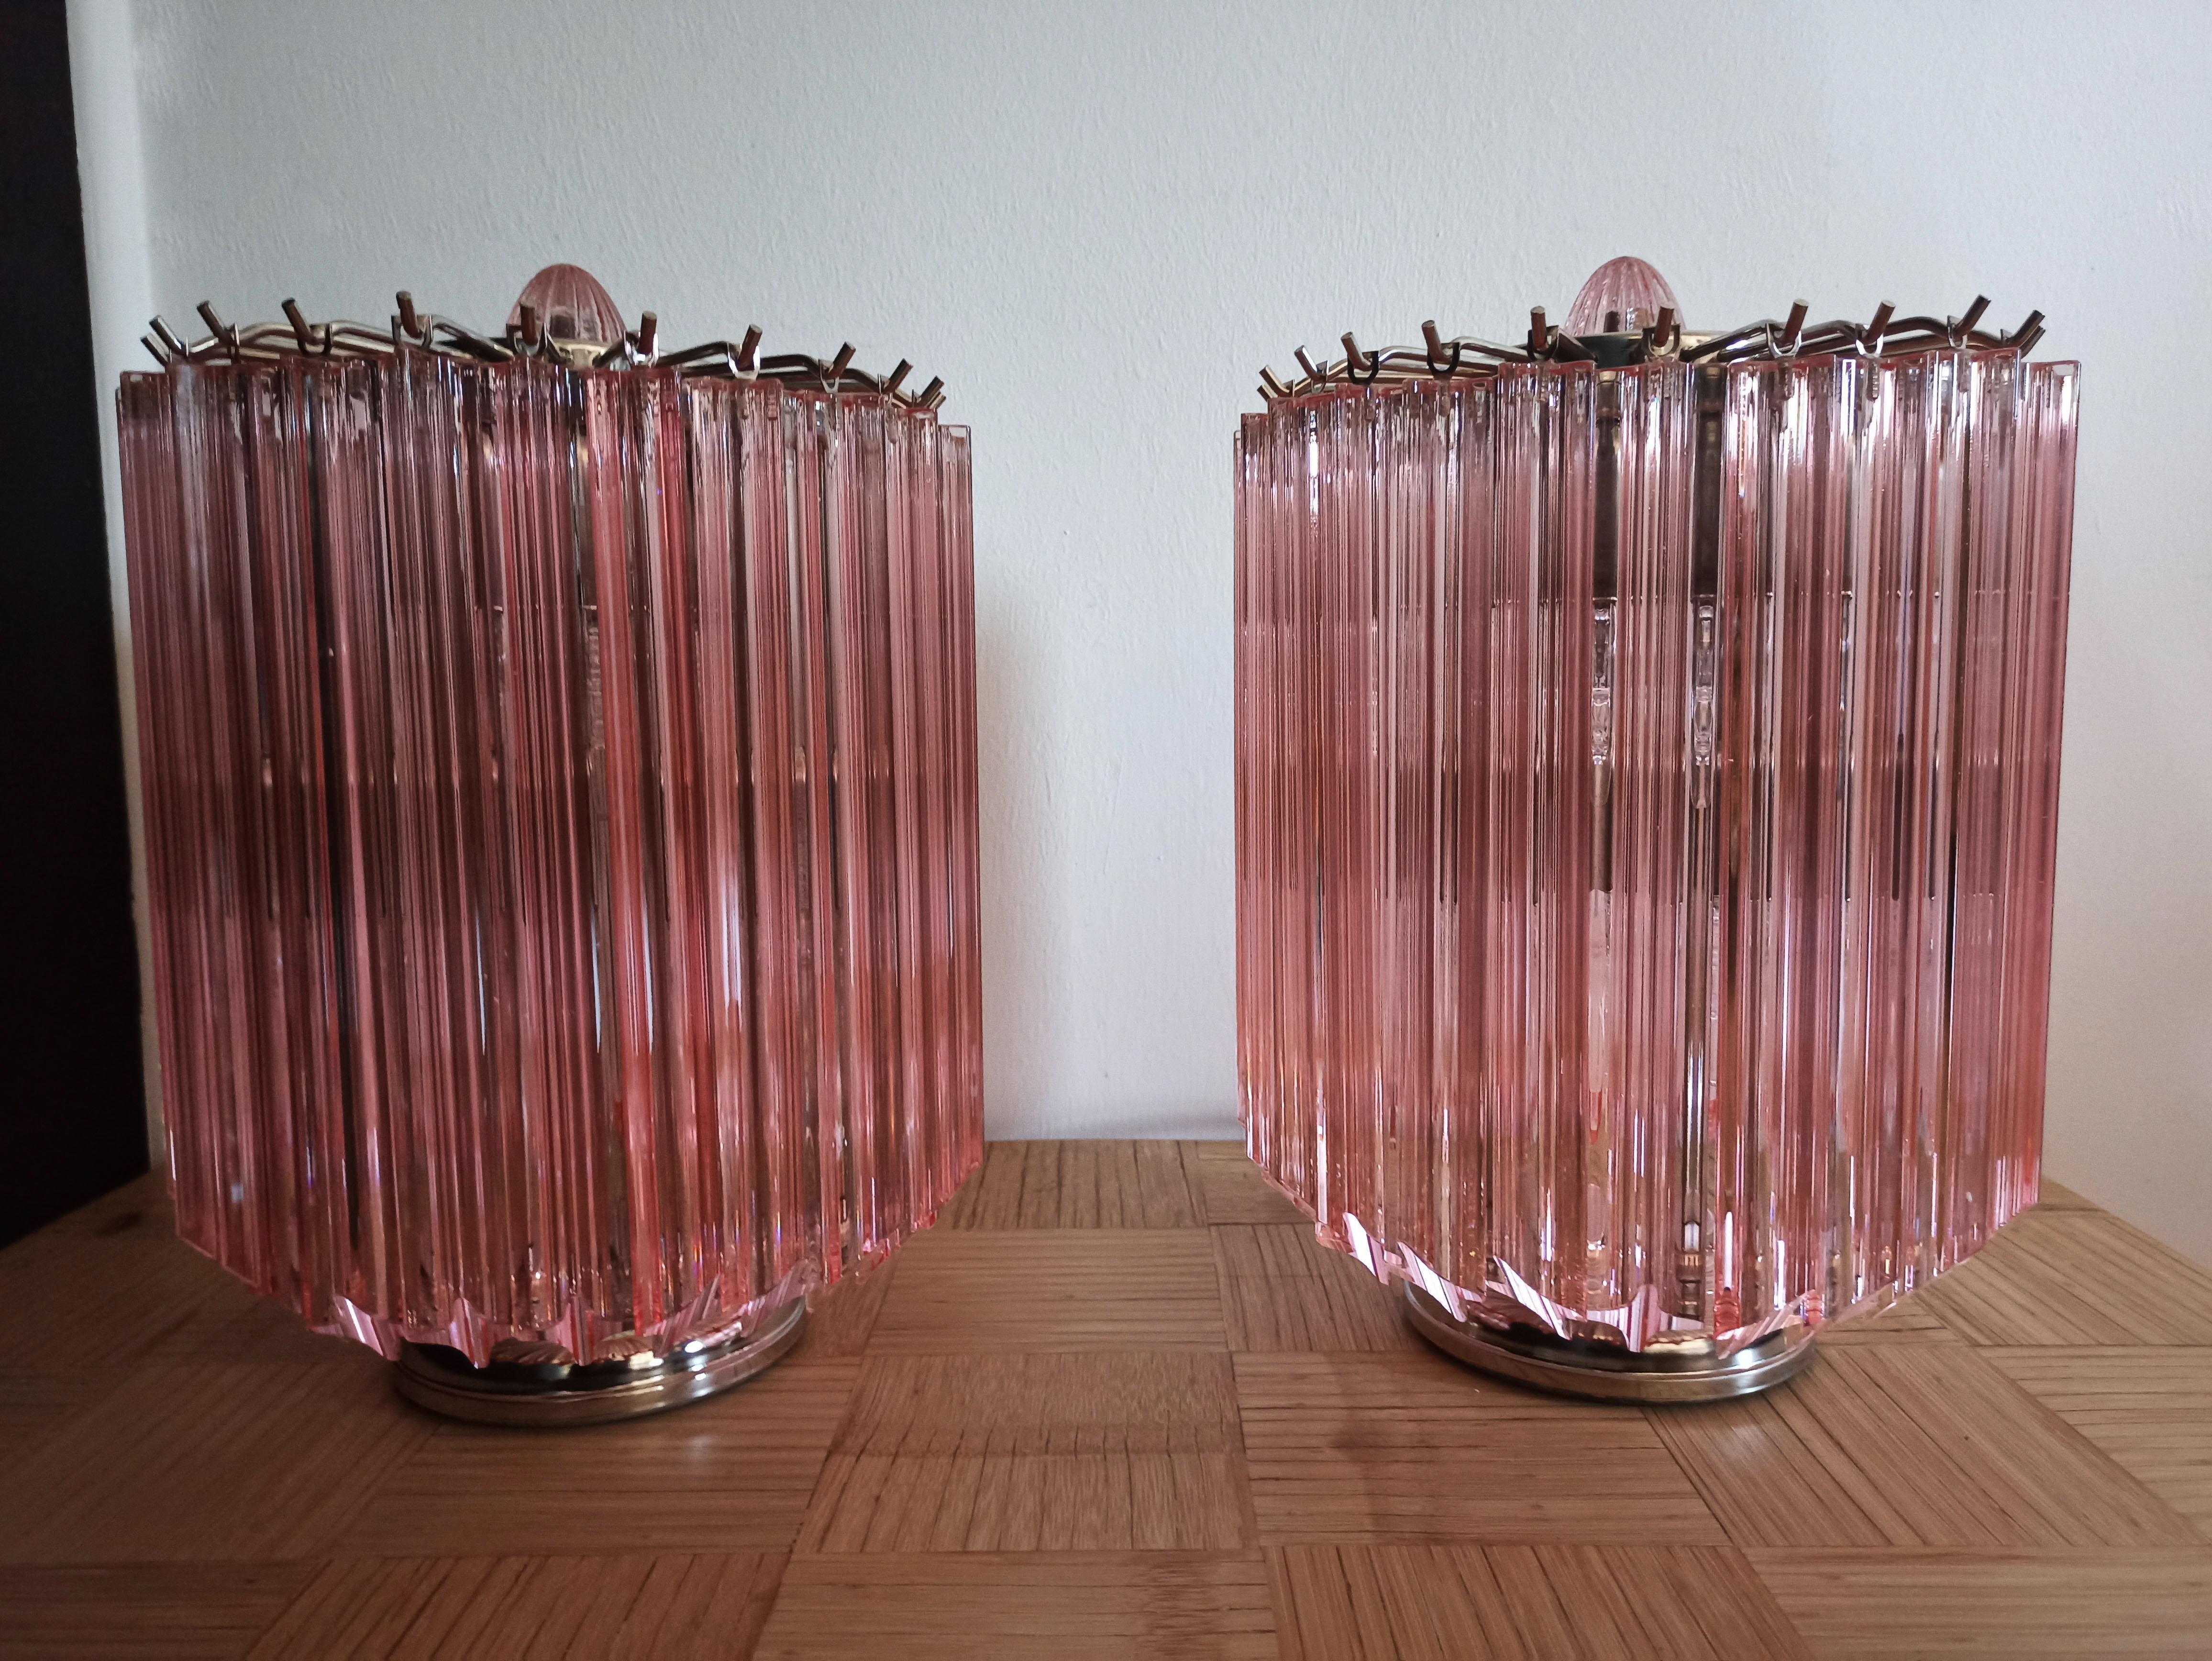 Magnificent pair of table lamps, 24 pink Quadriedri for each lamp. Elegant object of furniture.
Period: Late 20th century
Dimensions: 15 inches (38 cm) height, 10.50 inches (27 cm) diameter.
Dimension glasses: 11 inches (28 cm) height
Light